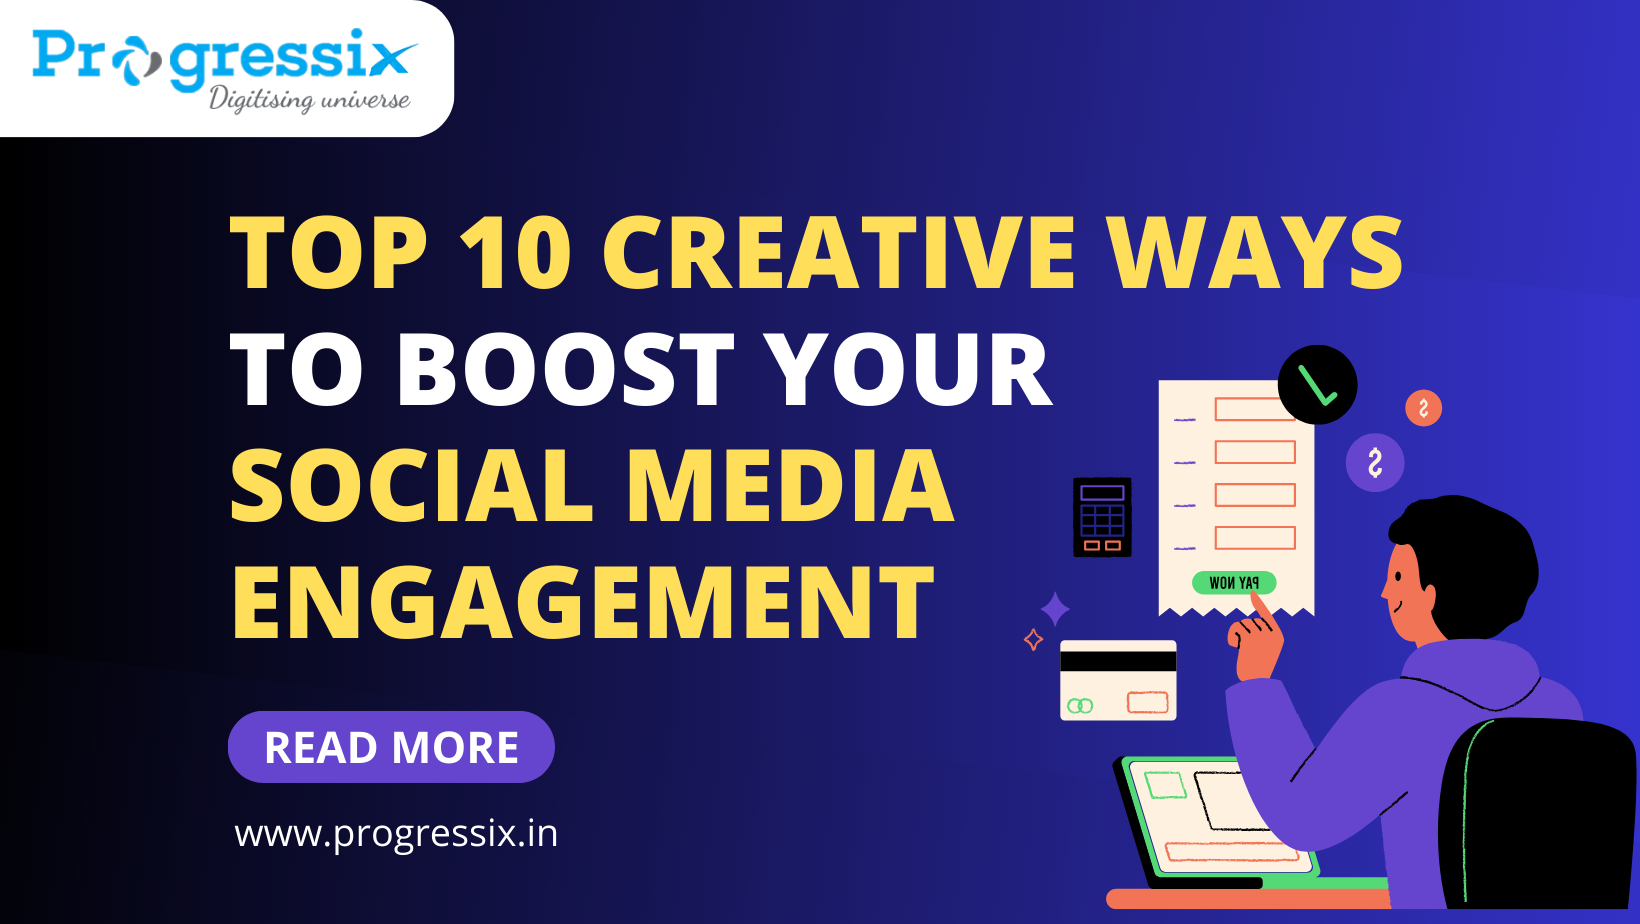 Top 10 Creative Ways to Boost Your Social Media Engagement